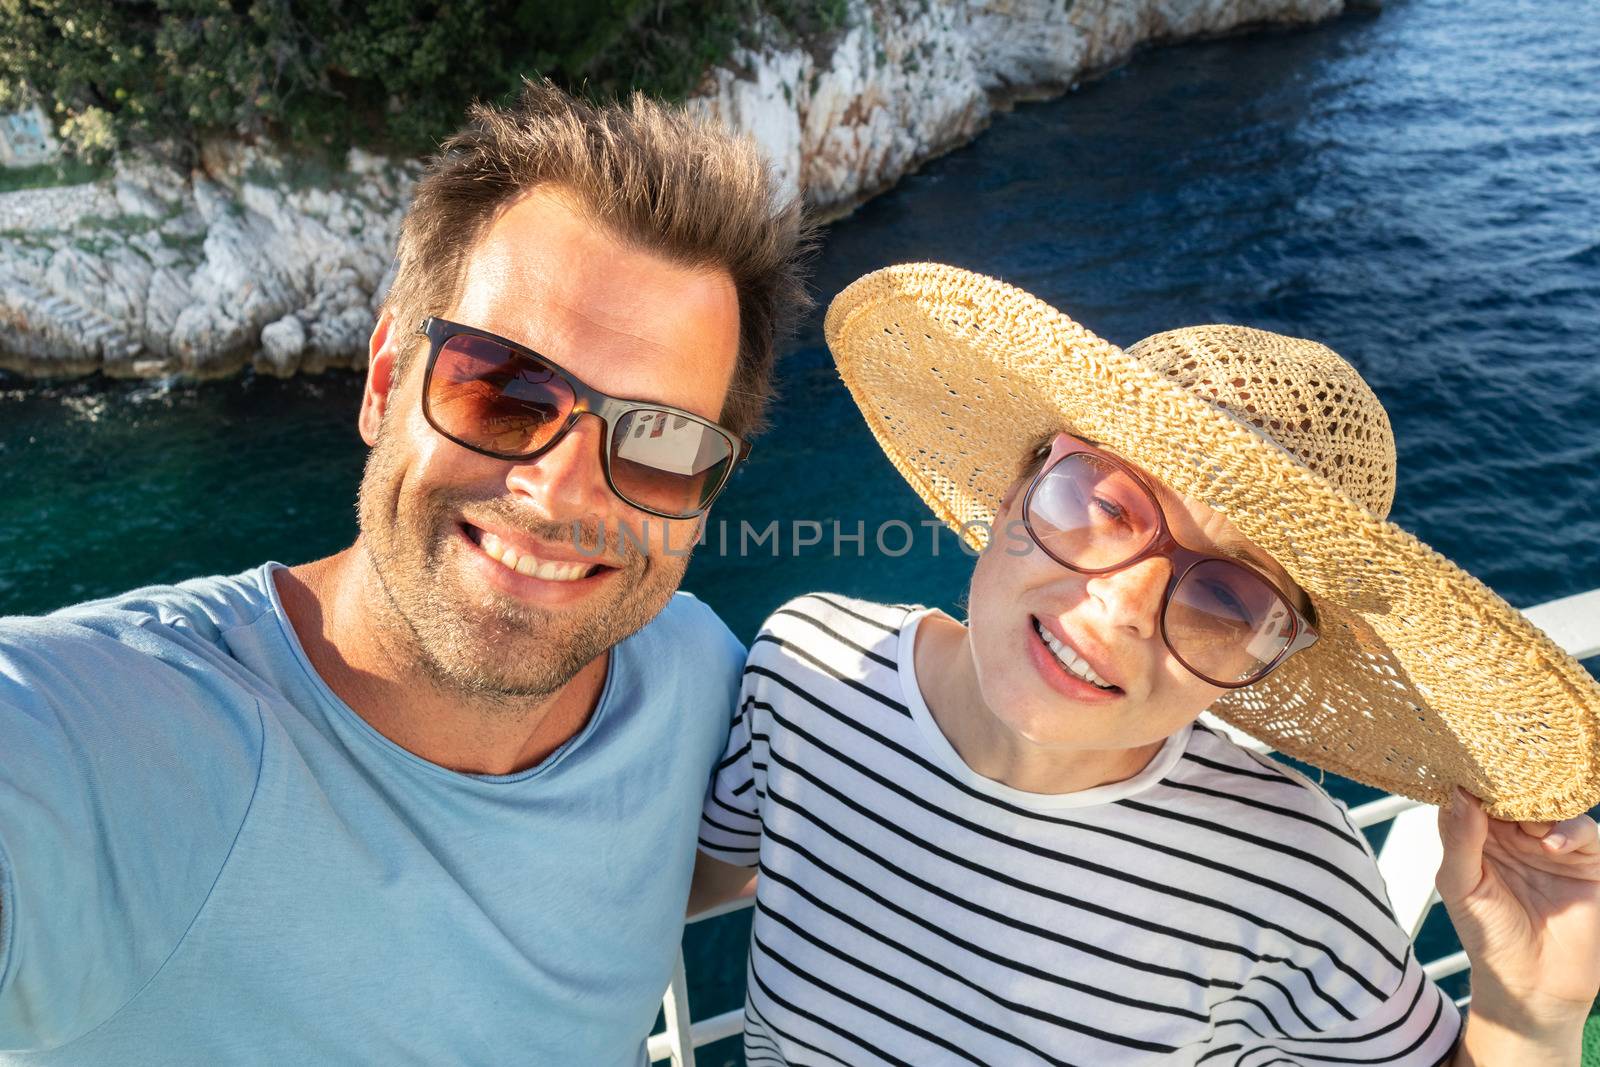 Beautiful, romantic caucasian couple taking selfie self portrait photo on summer vacations traveling by cruse ship ferry boat. Relaxed cheerful lifestyle couple selfie.